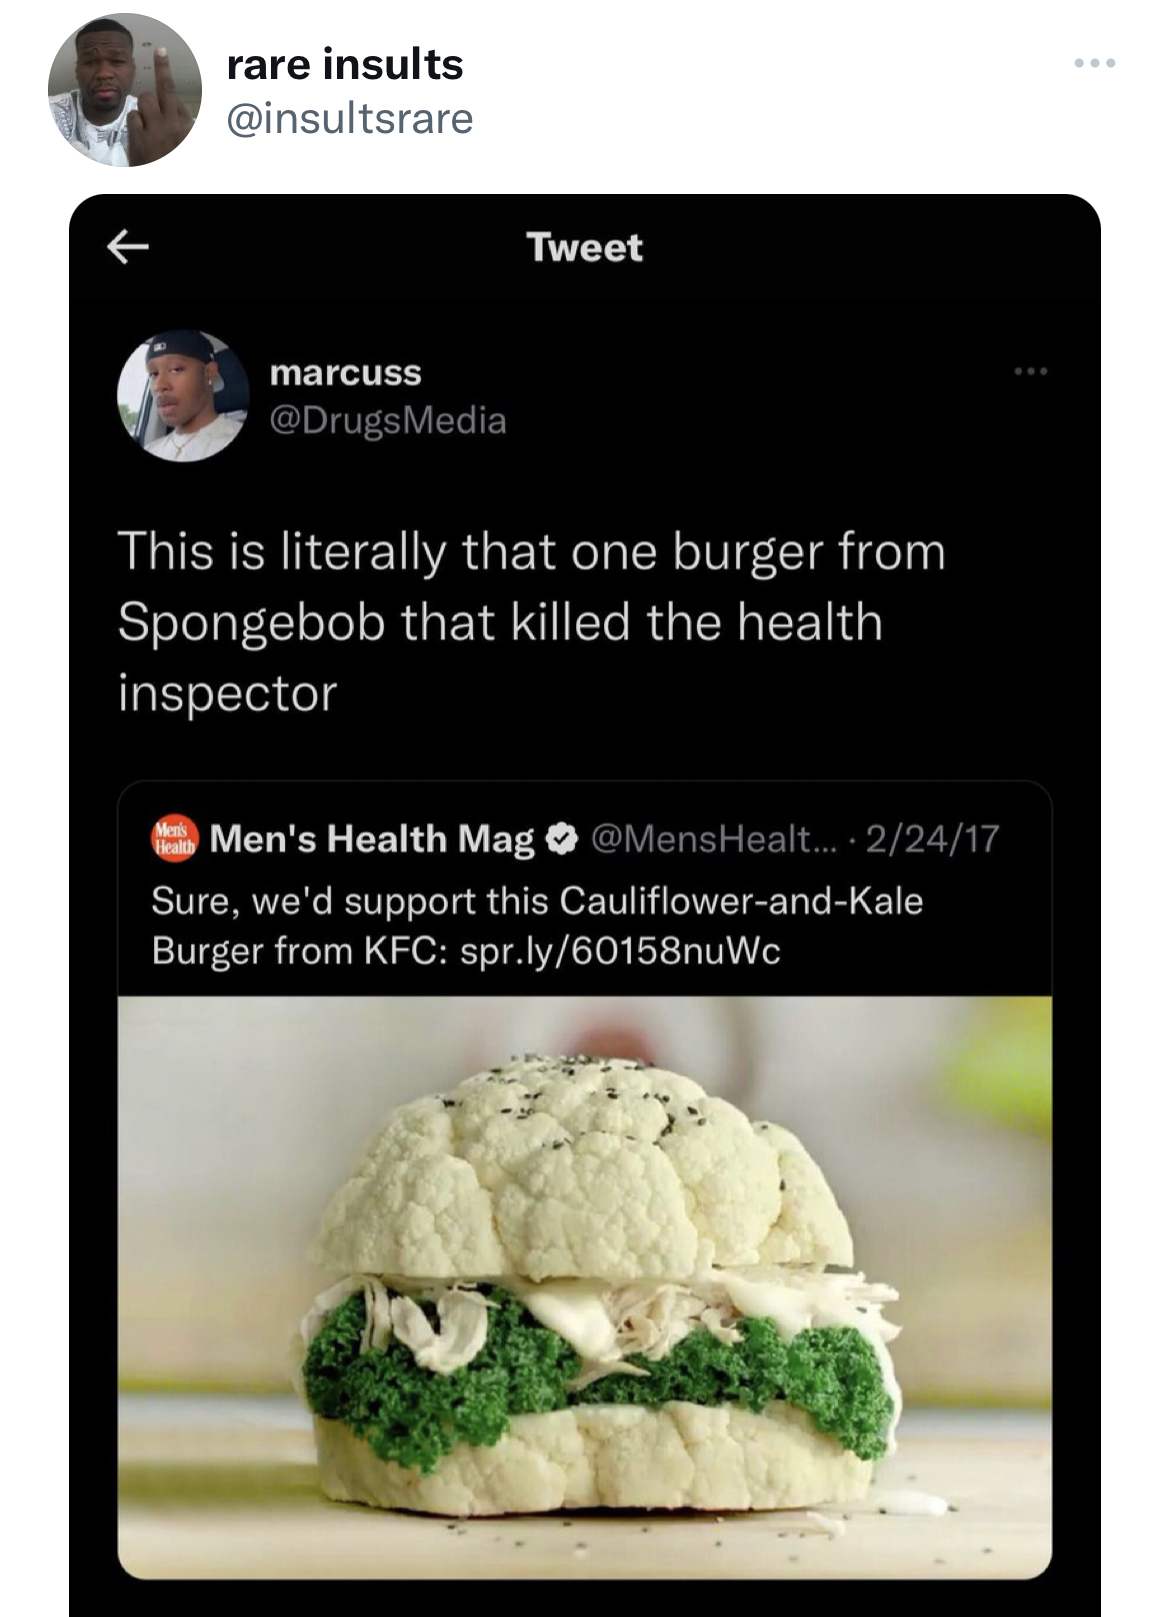 savage tweets - recipe - rare insults marcuss Tweet This is literally that one burger from Spongebob that killed the health inspector Men's Health Mag ... 22417 Sure, we'd support this CauliflowerandKale Burger from Kfc spr.ly60158nuWc www